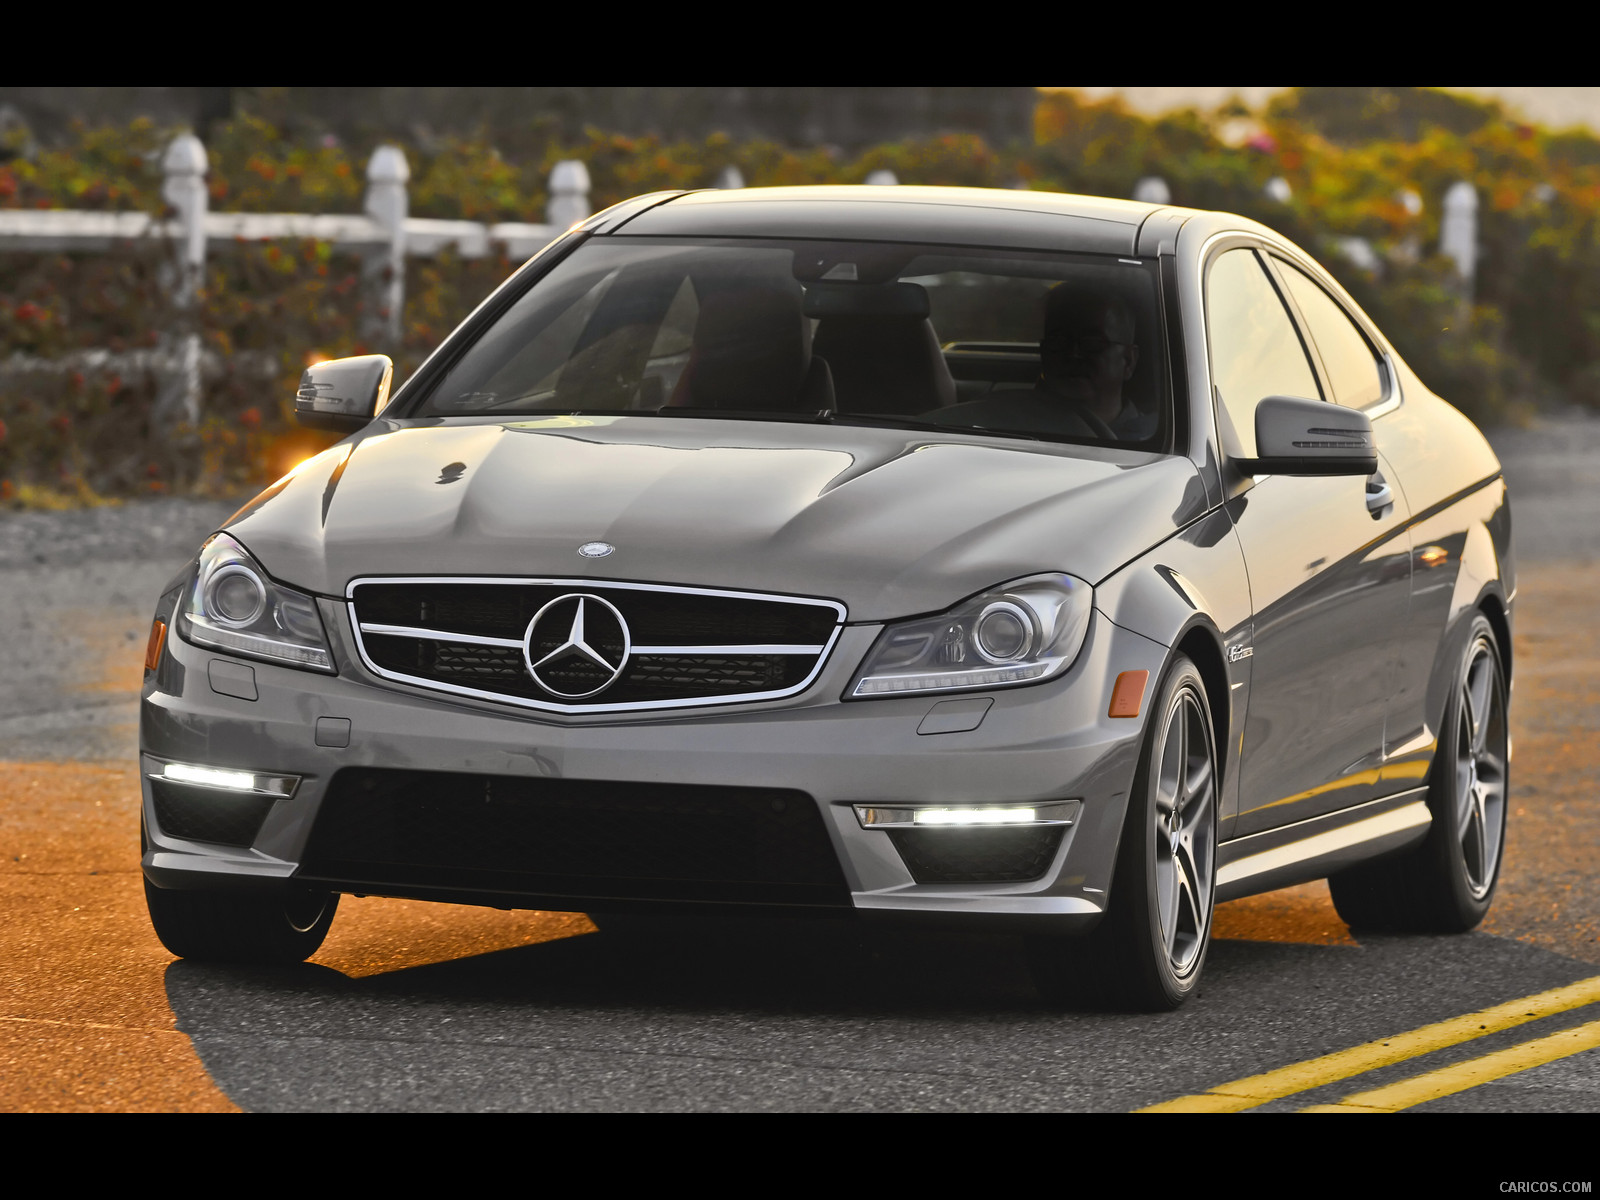 Mercedes-Benz C63 AMG Coupe (2012) with MCT transmission - , #12 of 64